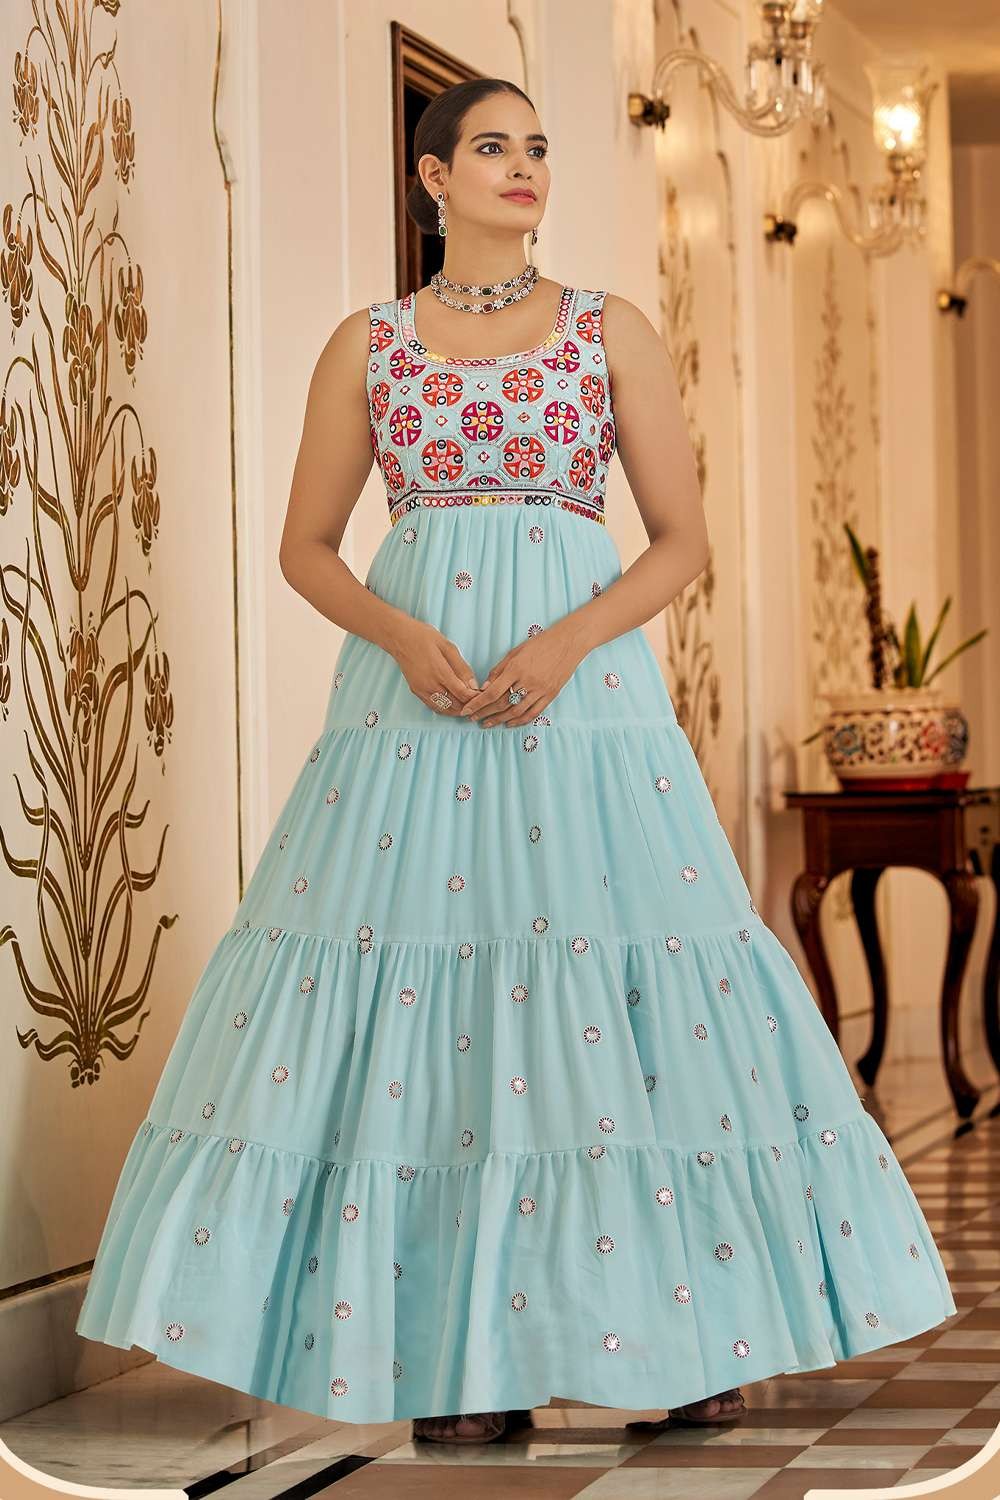 Lovely Sky Blue Sequined Stars Girls Pageant Gown Party Dress with Sheer  Bubble Sleeves Wholesale #TG8024 - GemGrace.com